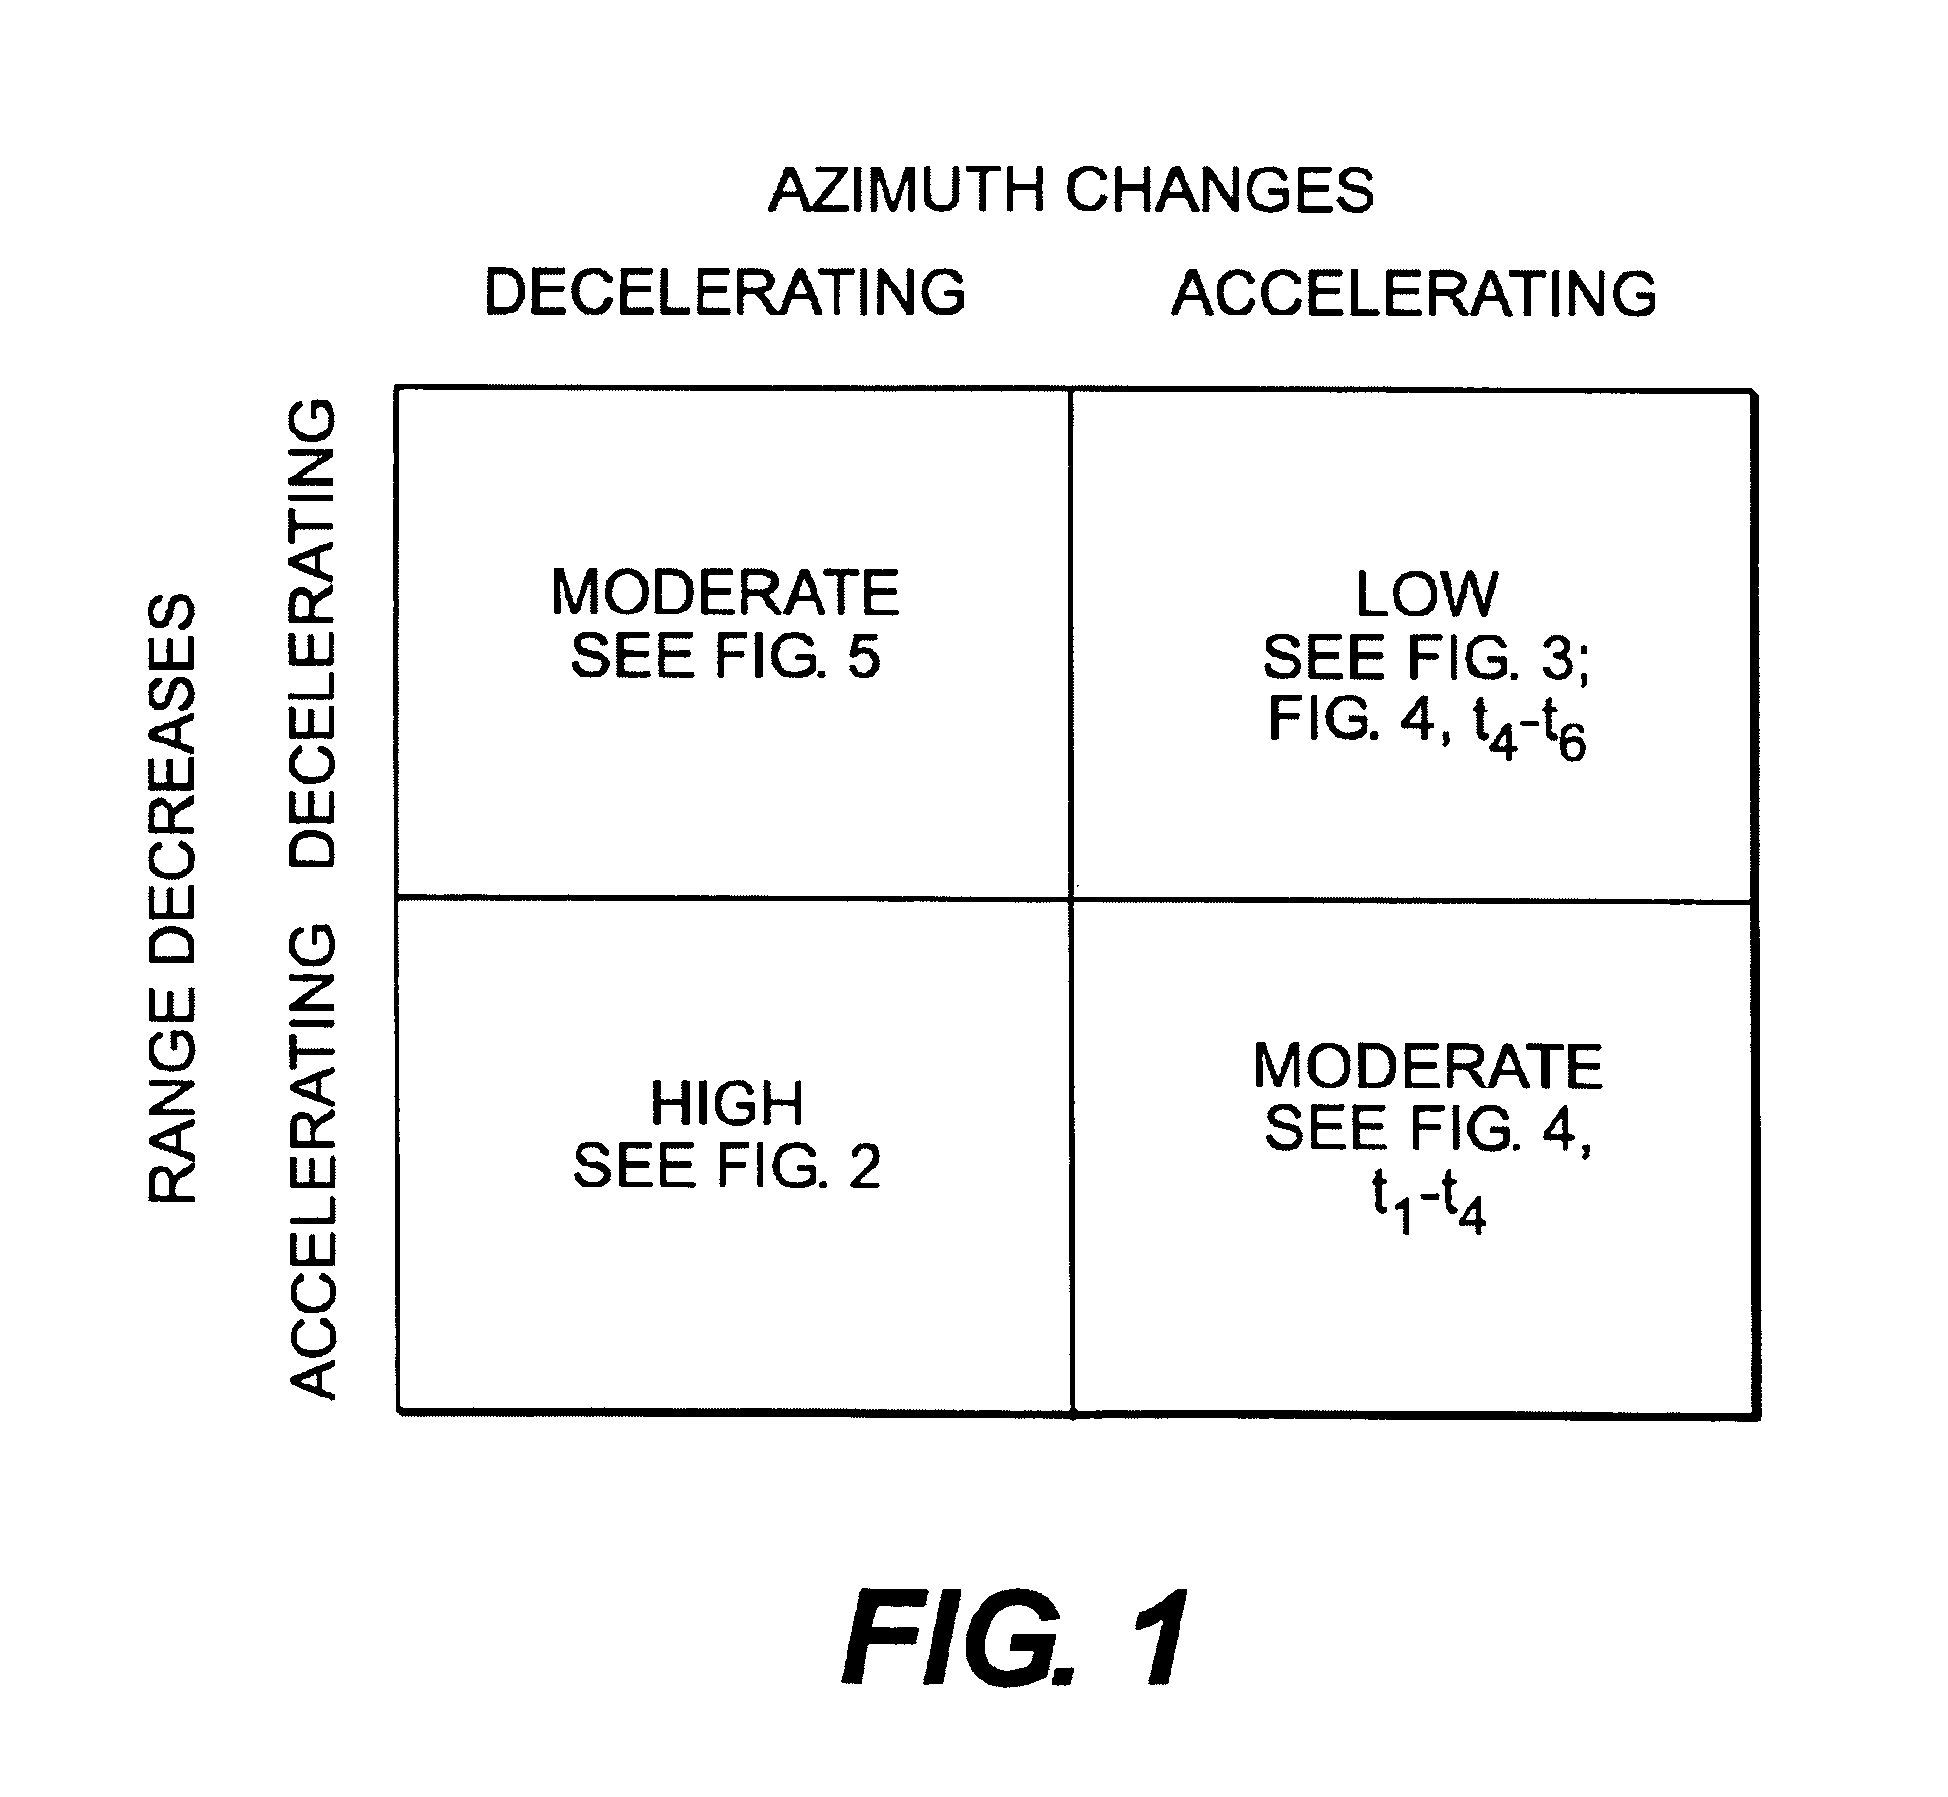 Method for determining collision risk for collision avoidance systems